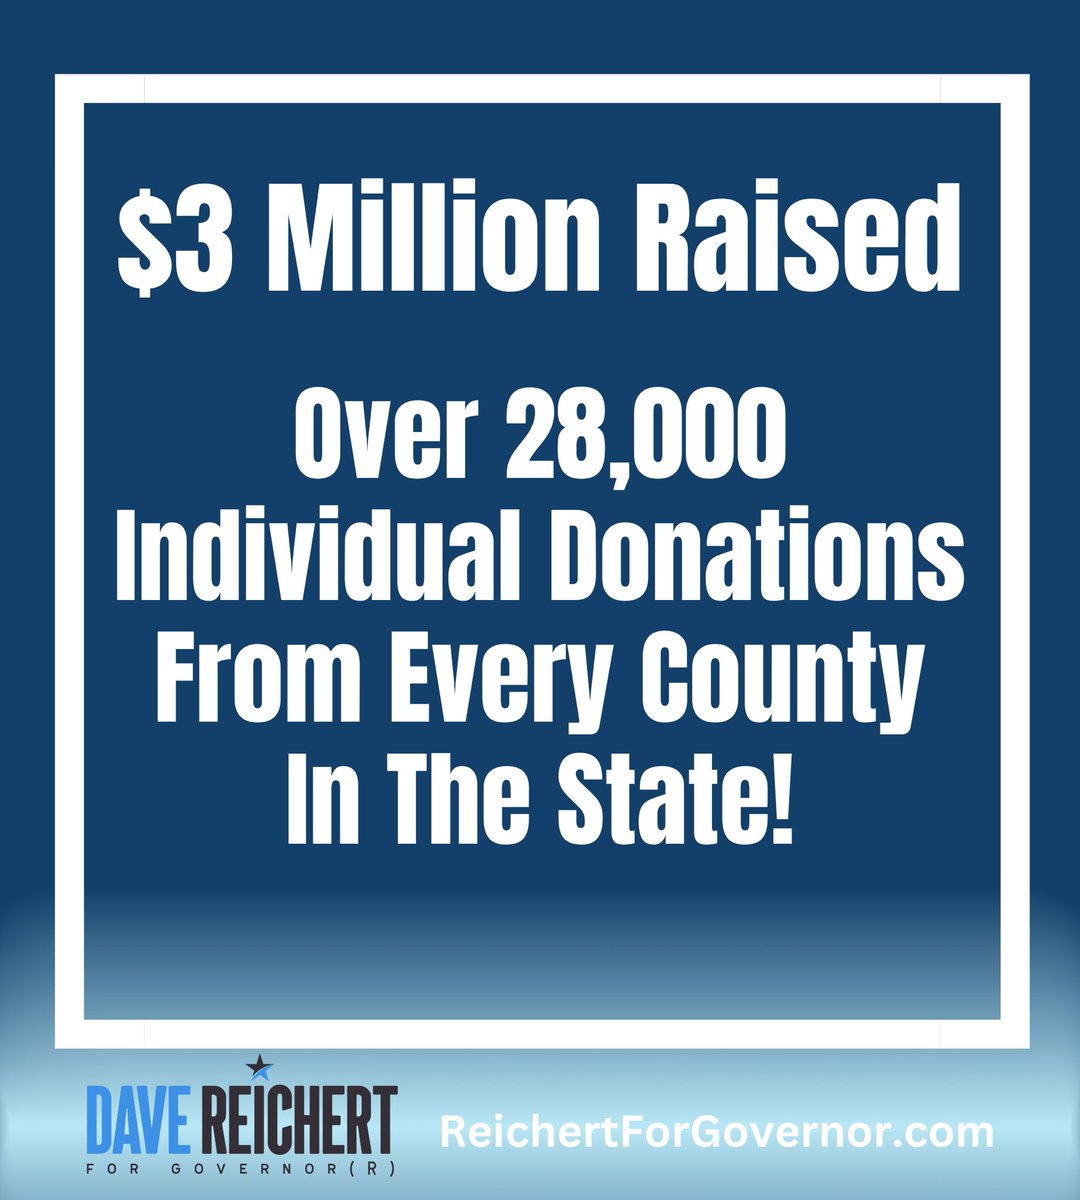 The momentum of our campaign continues to grow daily as we look towards November! We’ve had over 28,000 individual donations and have raised $3 million with small dollar donor support across the state! Everyone agrees Dave Reichert is our best chance of winning in decades!…